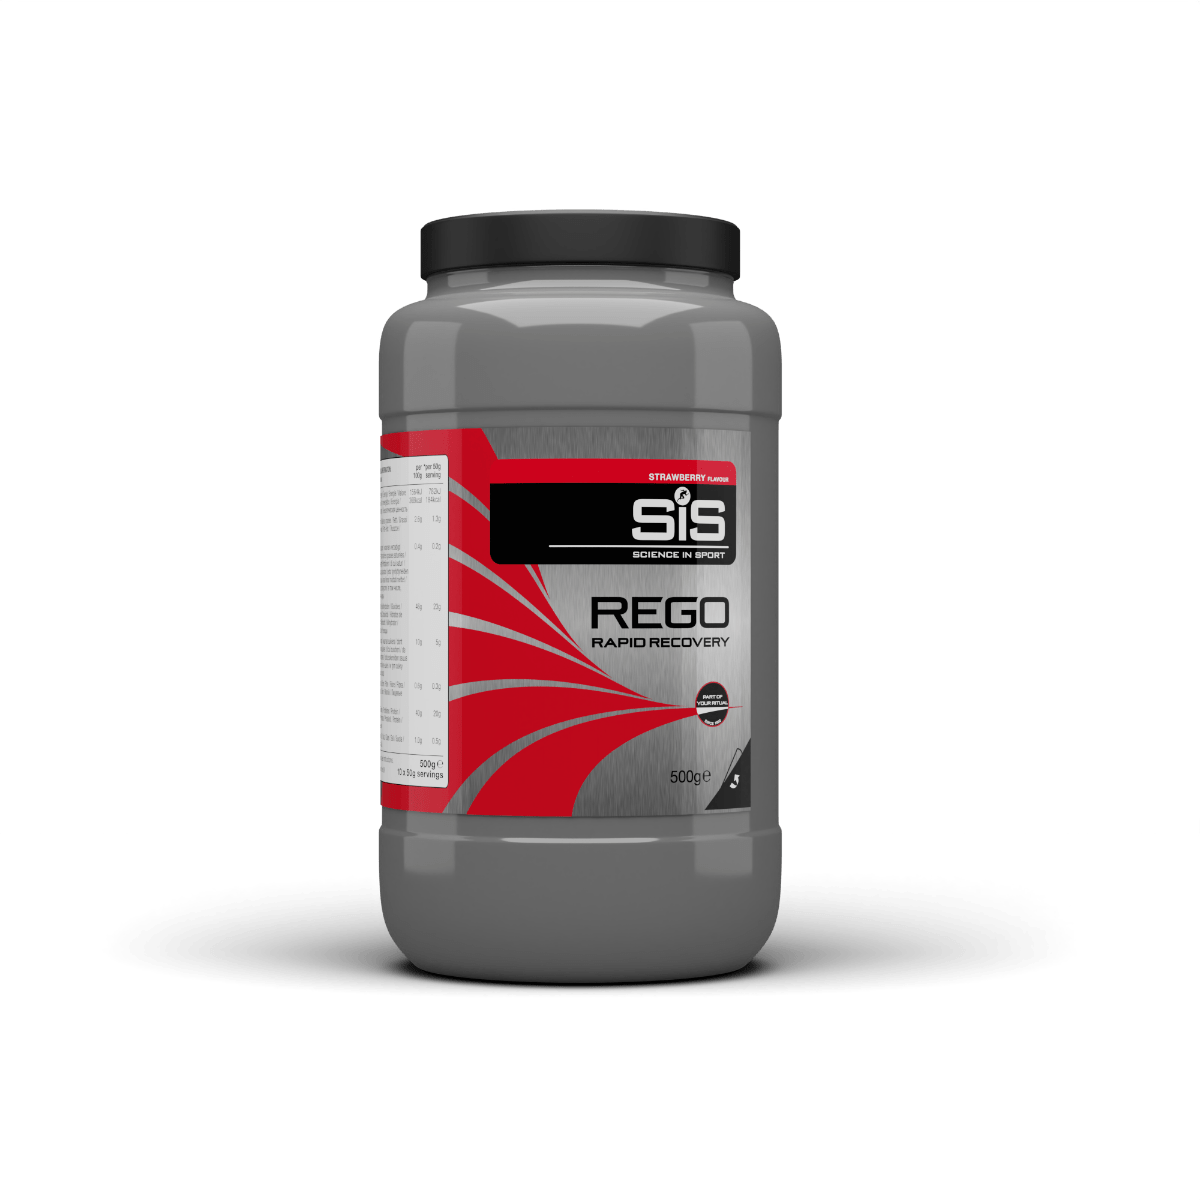 SiS Protein Drink 10 Serving Tub (500g) / Strawberry REGO Rapid Recovery XMiles